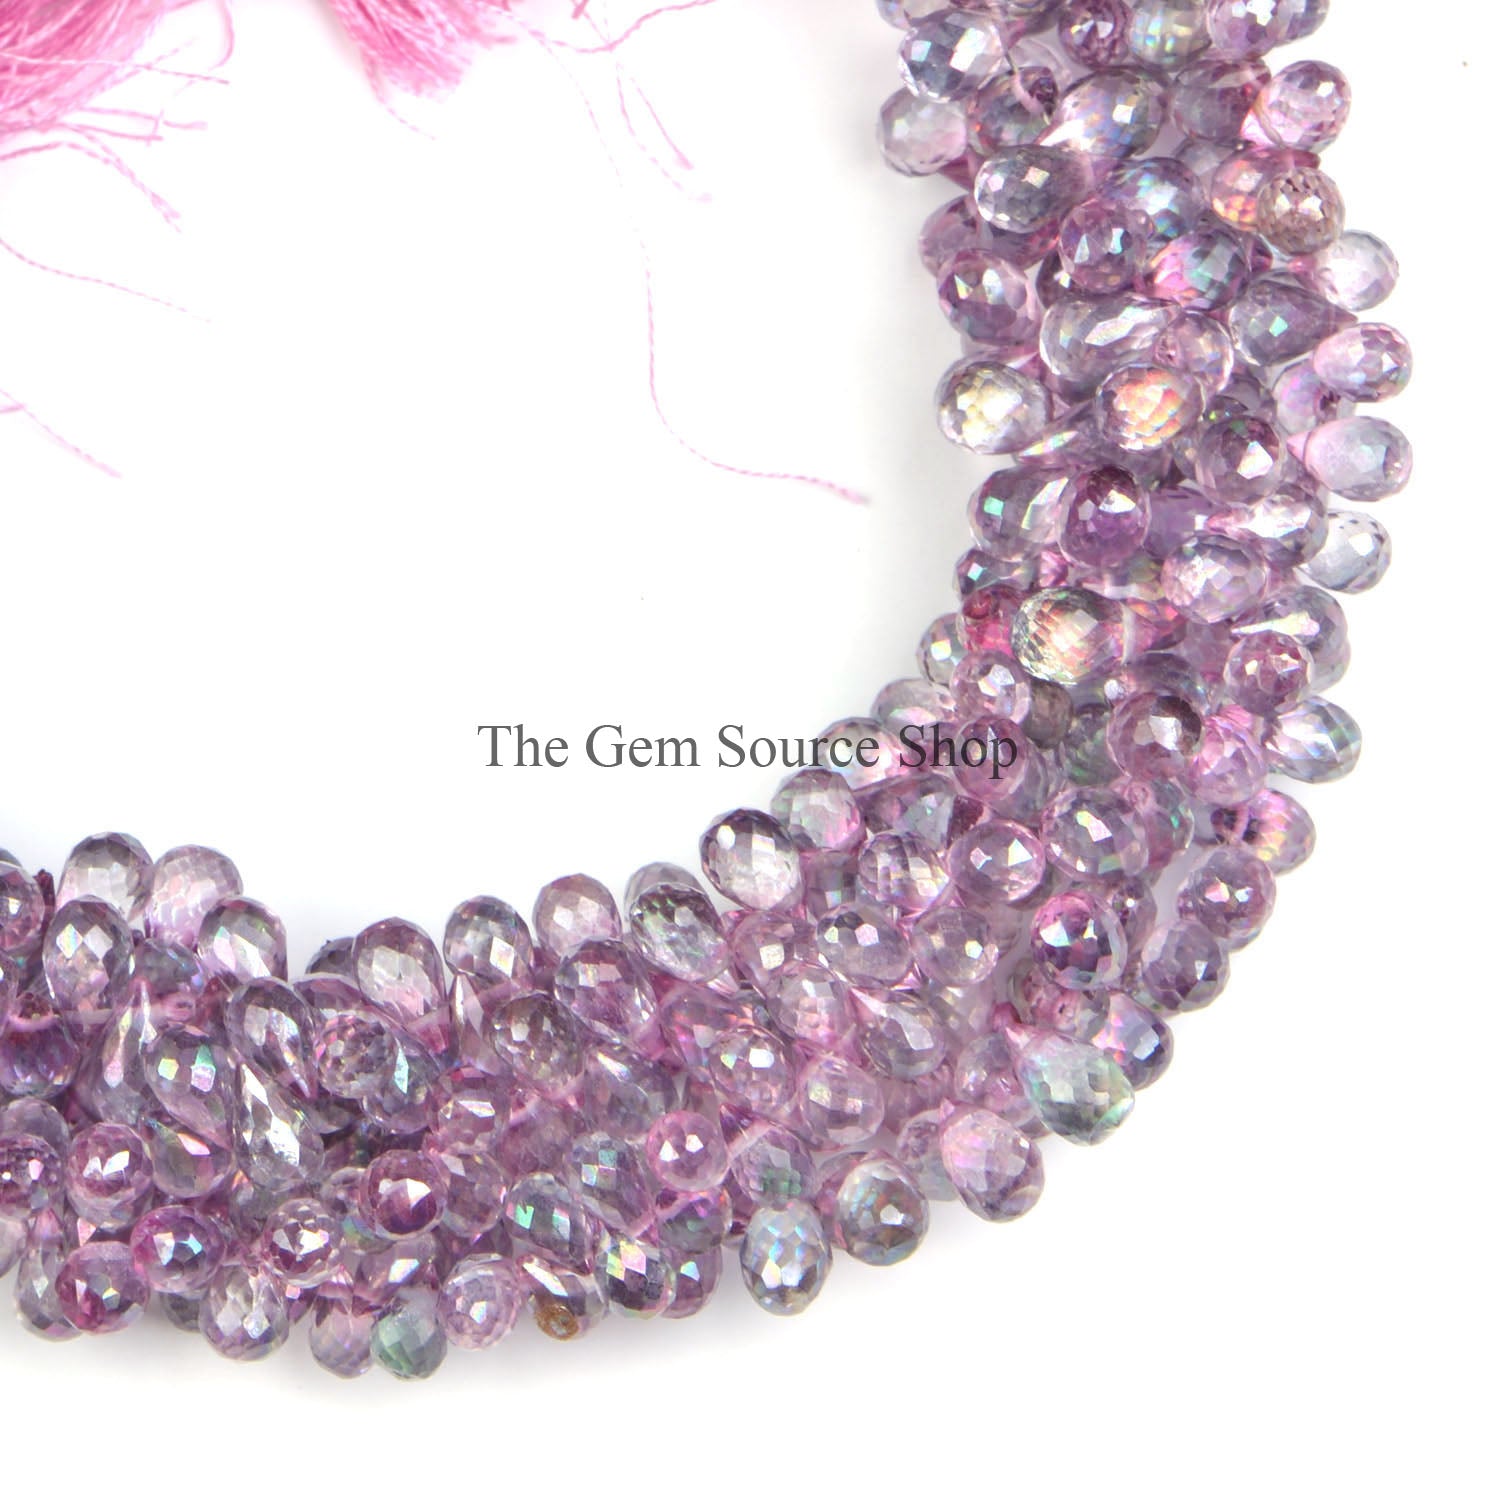 Pink Mystic Topaz Beads, Mystic Topaz Faceted Beads, Faceted Drop Beads, Mystic Topaz Gemstone